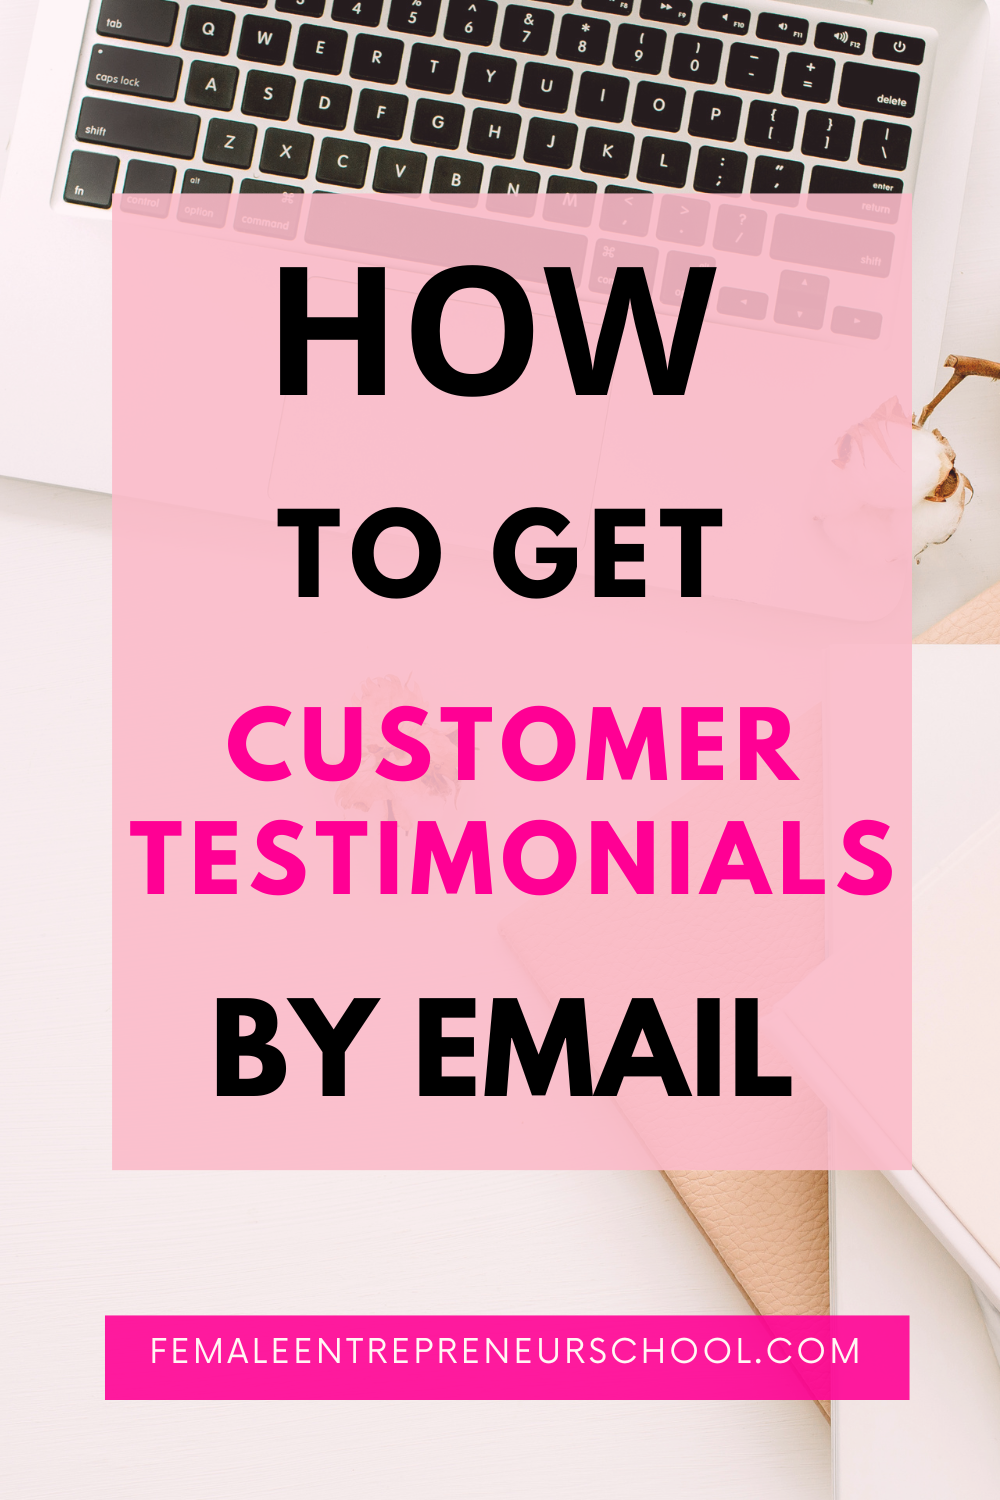 How To Get Customer Testimonials By Email